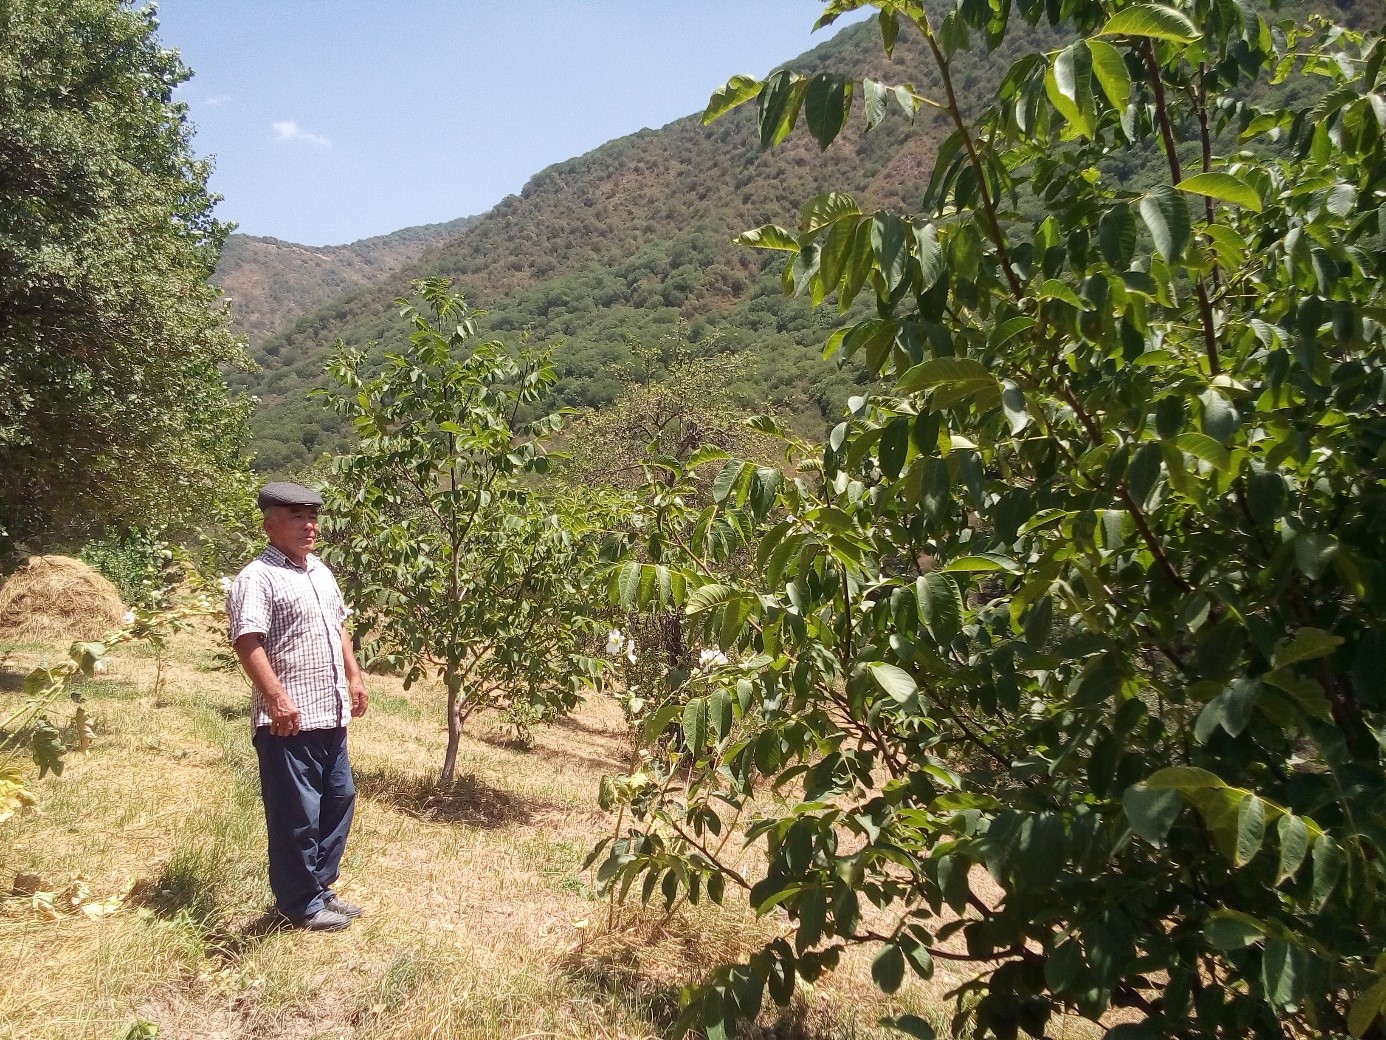 A smallholder in Jalalabad (Kyrgyzstan) proudly presents his agroforestry system with fruit trees.